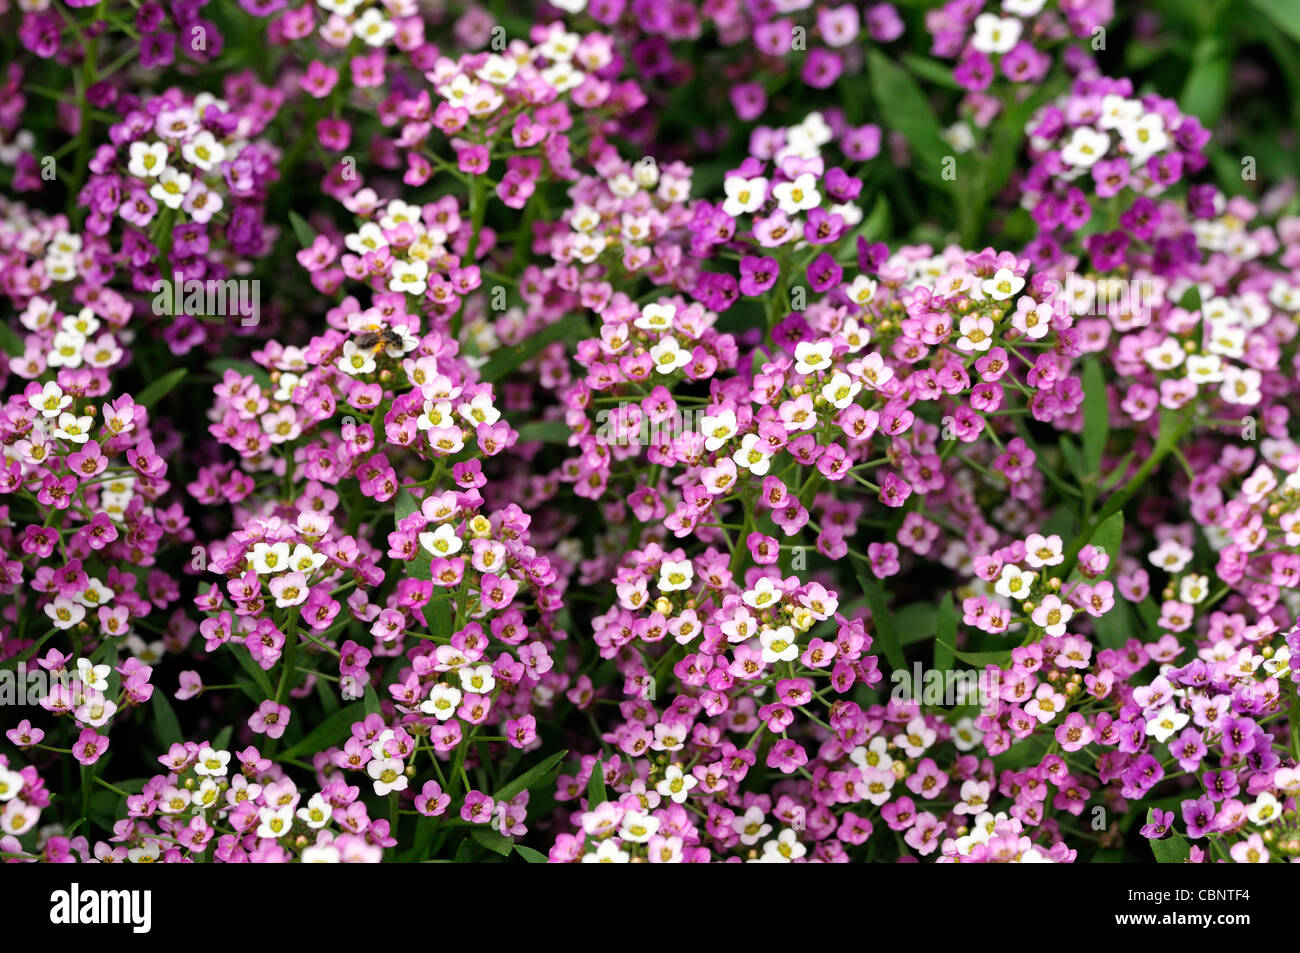 Alyssum Rosie O'Day white pink flowers blooms blossoms hardy annual dense uniform habit Stock Photo